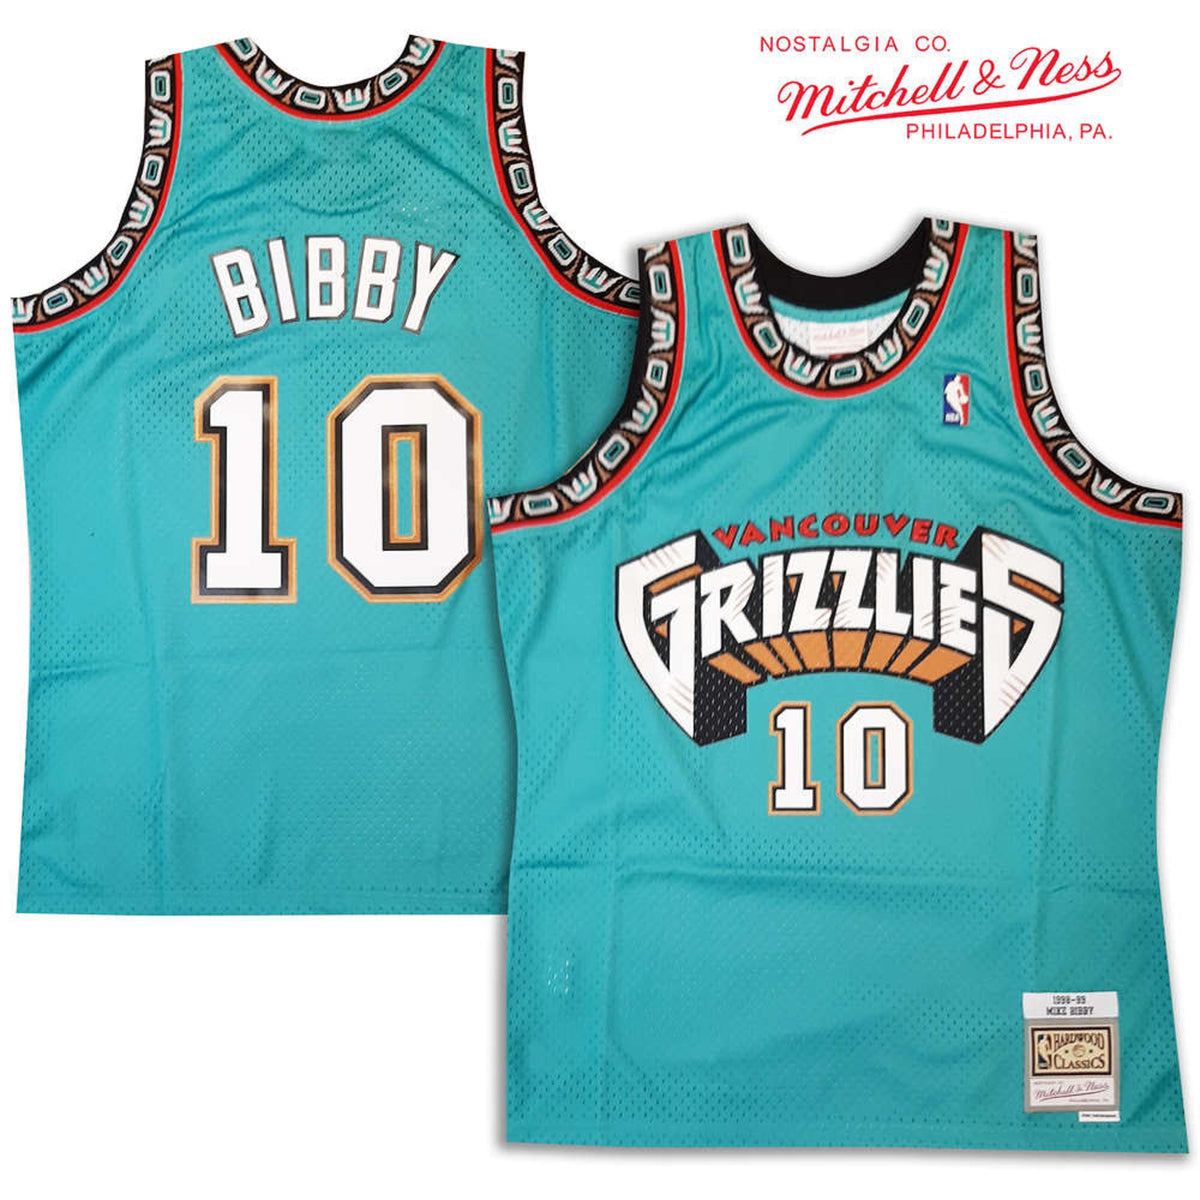 Mike Bibby Vancouver Grizzlies #10 Black Small Mitchell & Ness